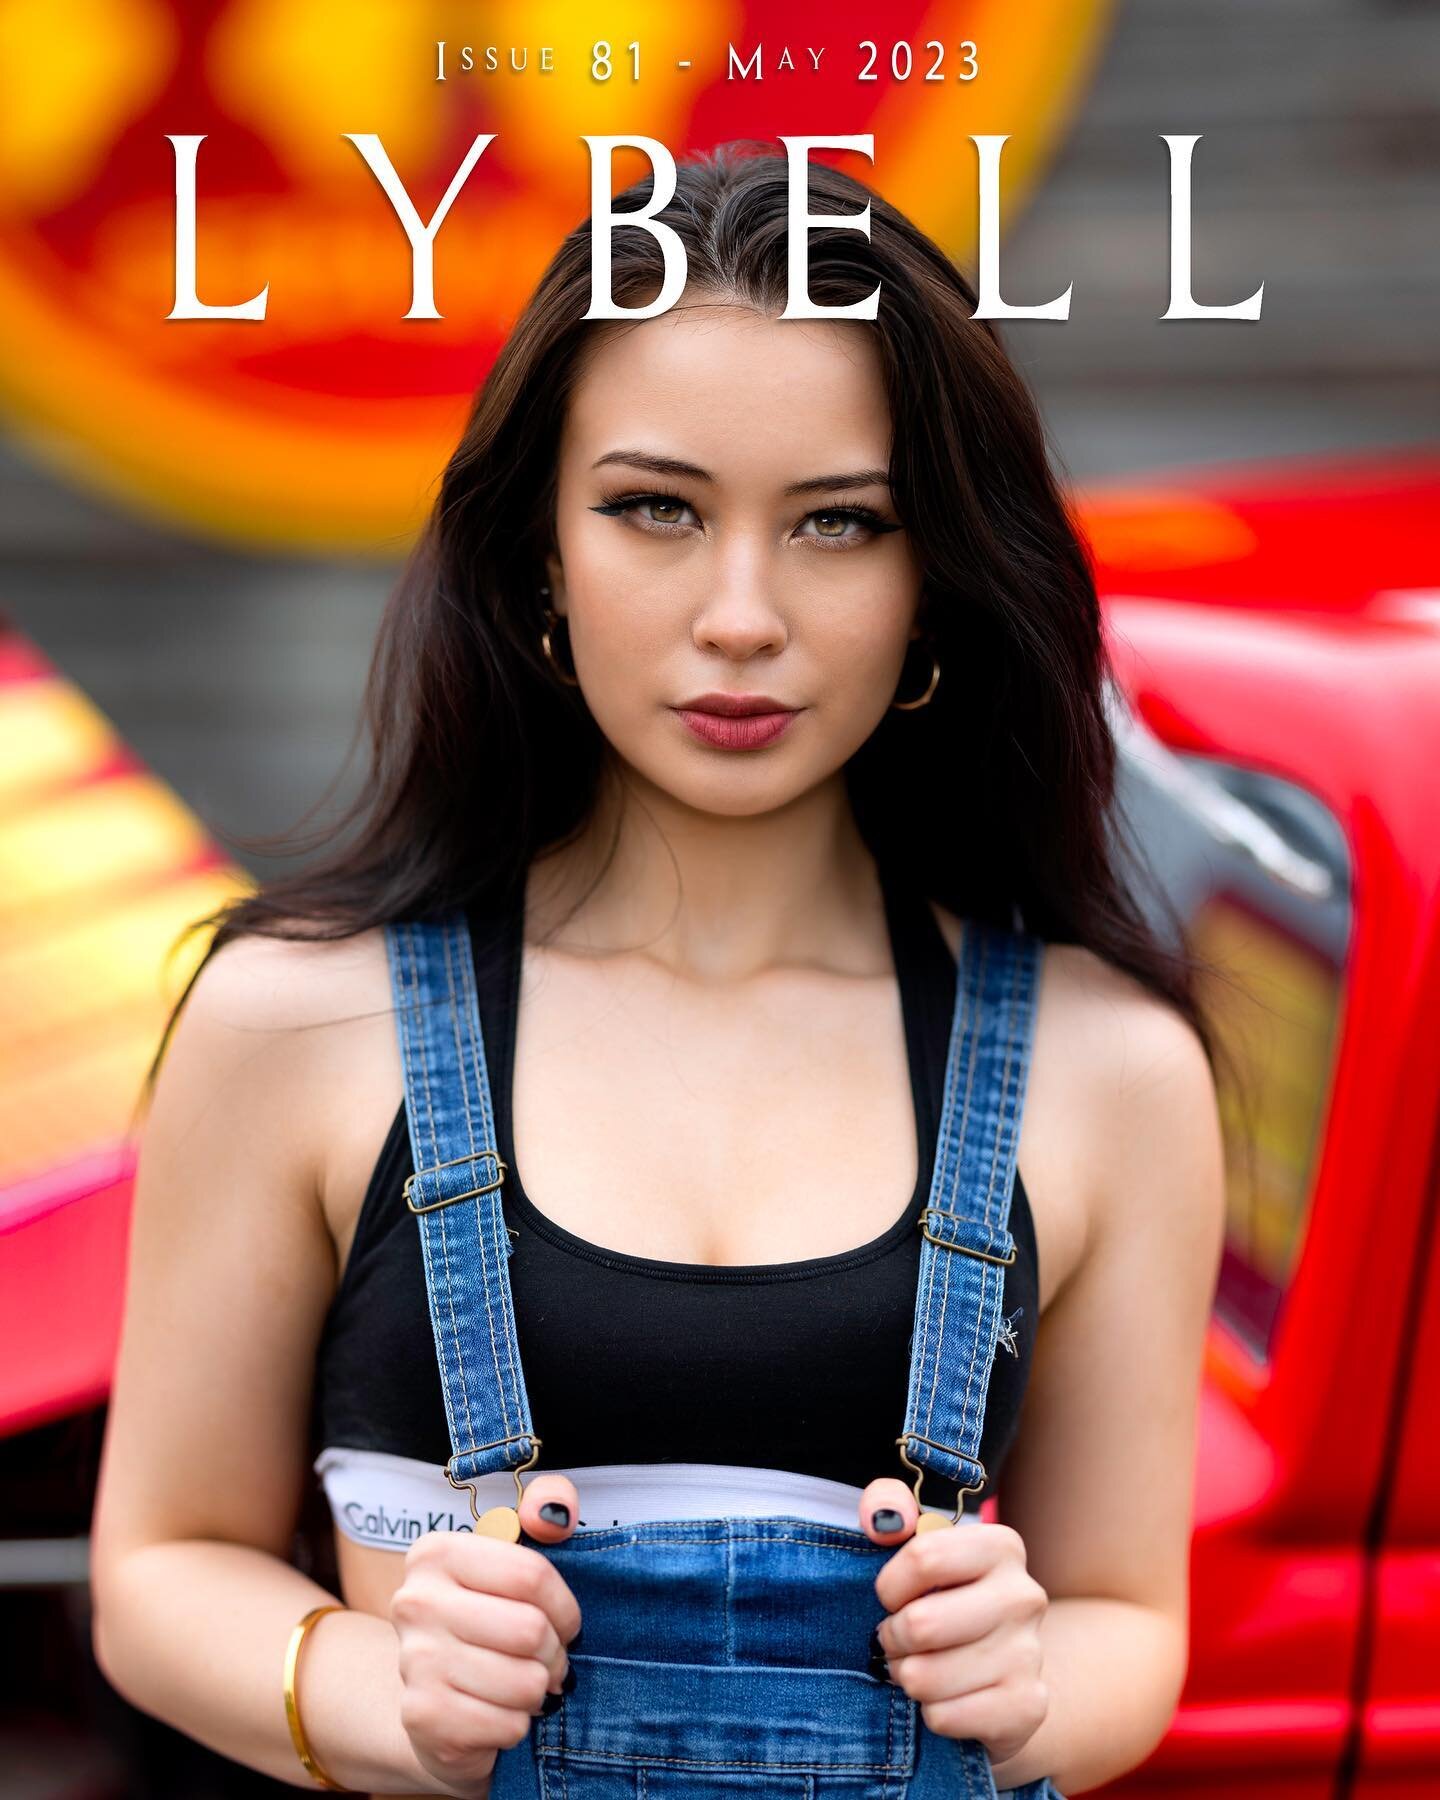 Cover photo of Issue 81!
Model: @katy_is_shady 
Photographer: @dave.flora.photography 
_____________________________________________
Lybell is an international magazine that features talented models and photographers. 
Tag @lybellmagazine or use #Lyb